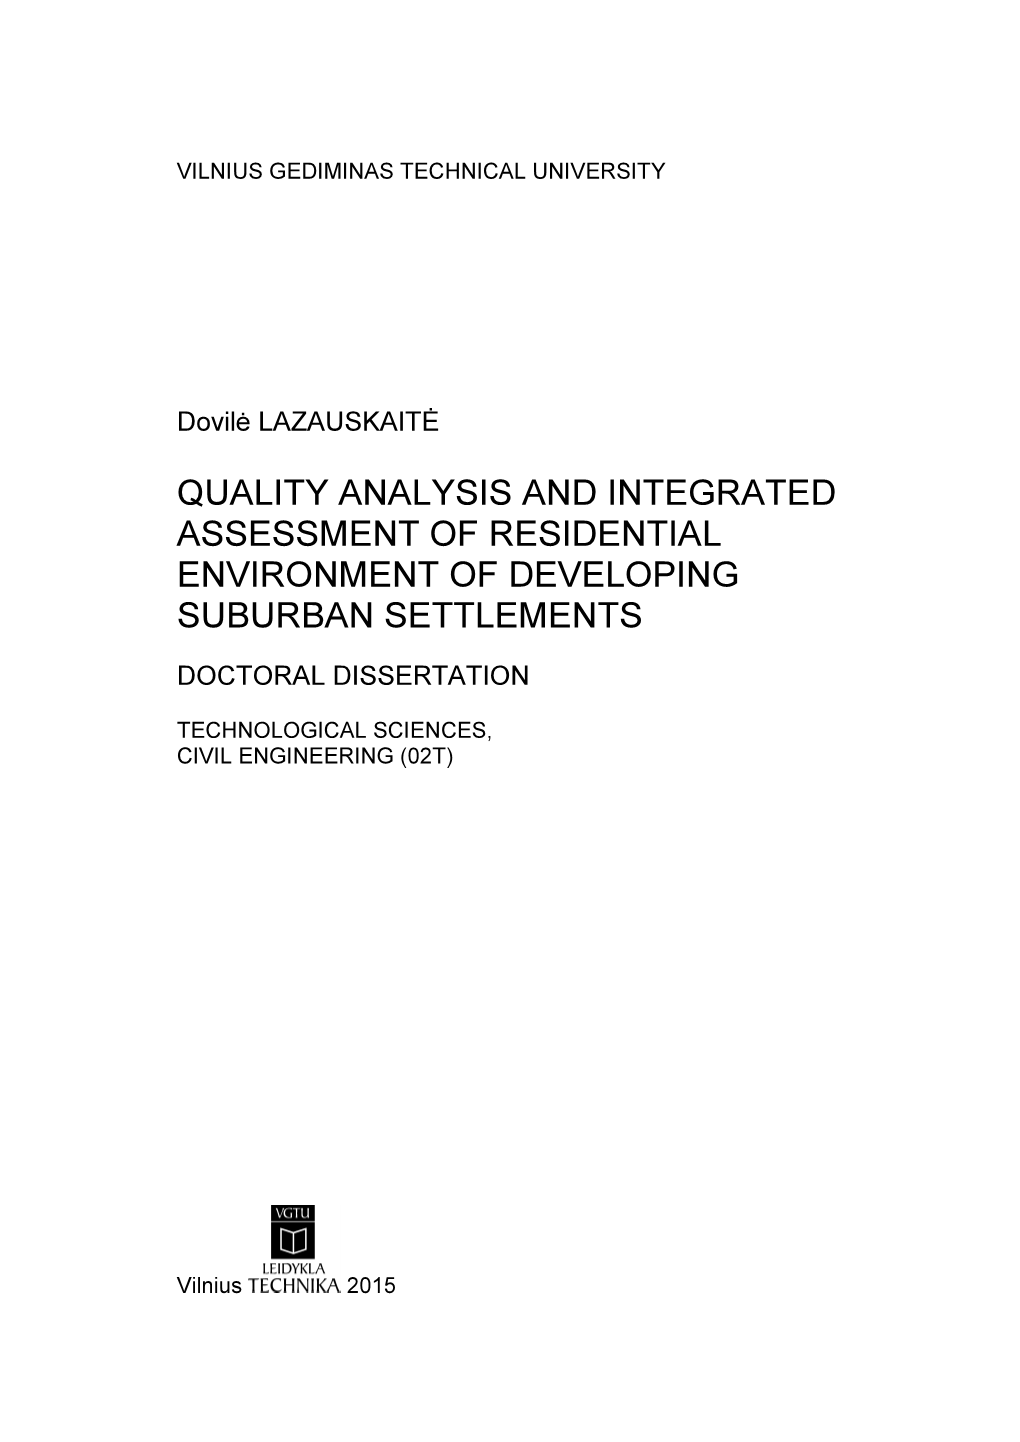 Quality Analysis and Integrated Assessment of Residential Environment of Developing Suburban Settlements Doctoral Dissertation